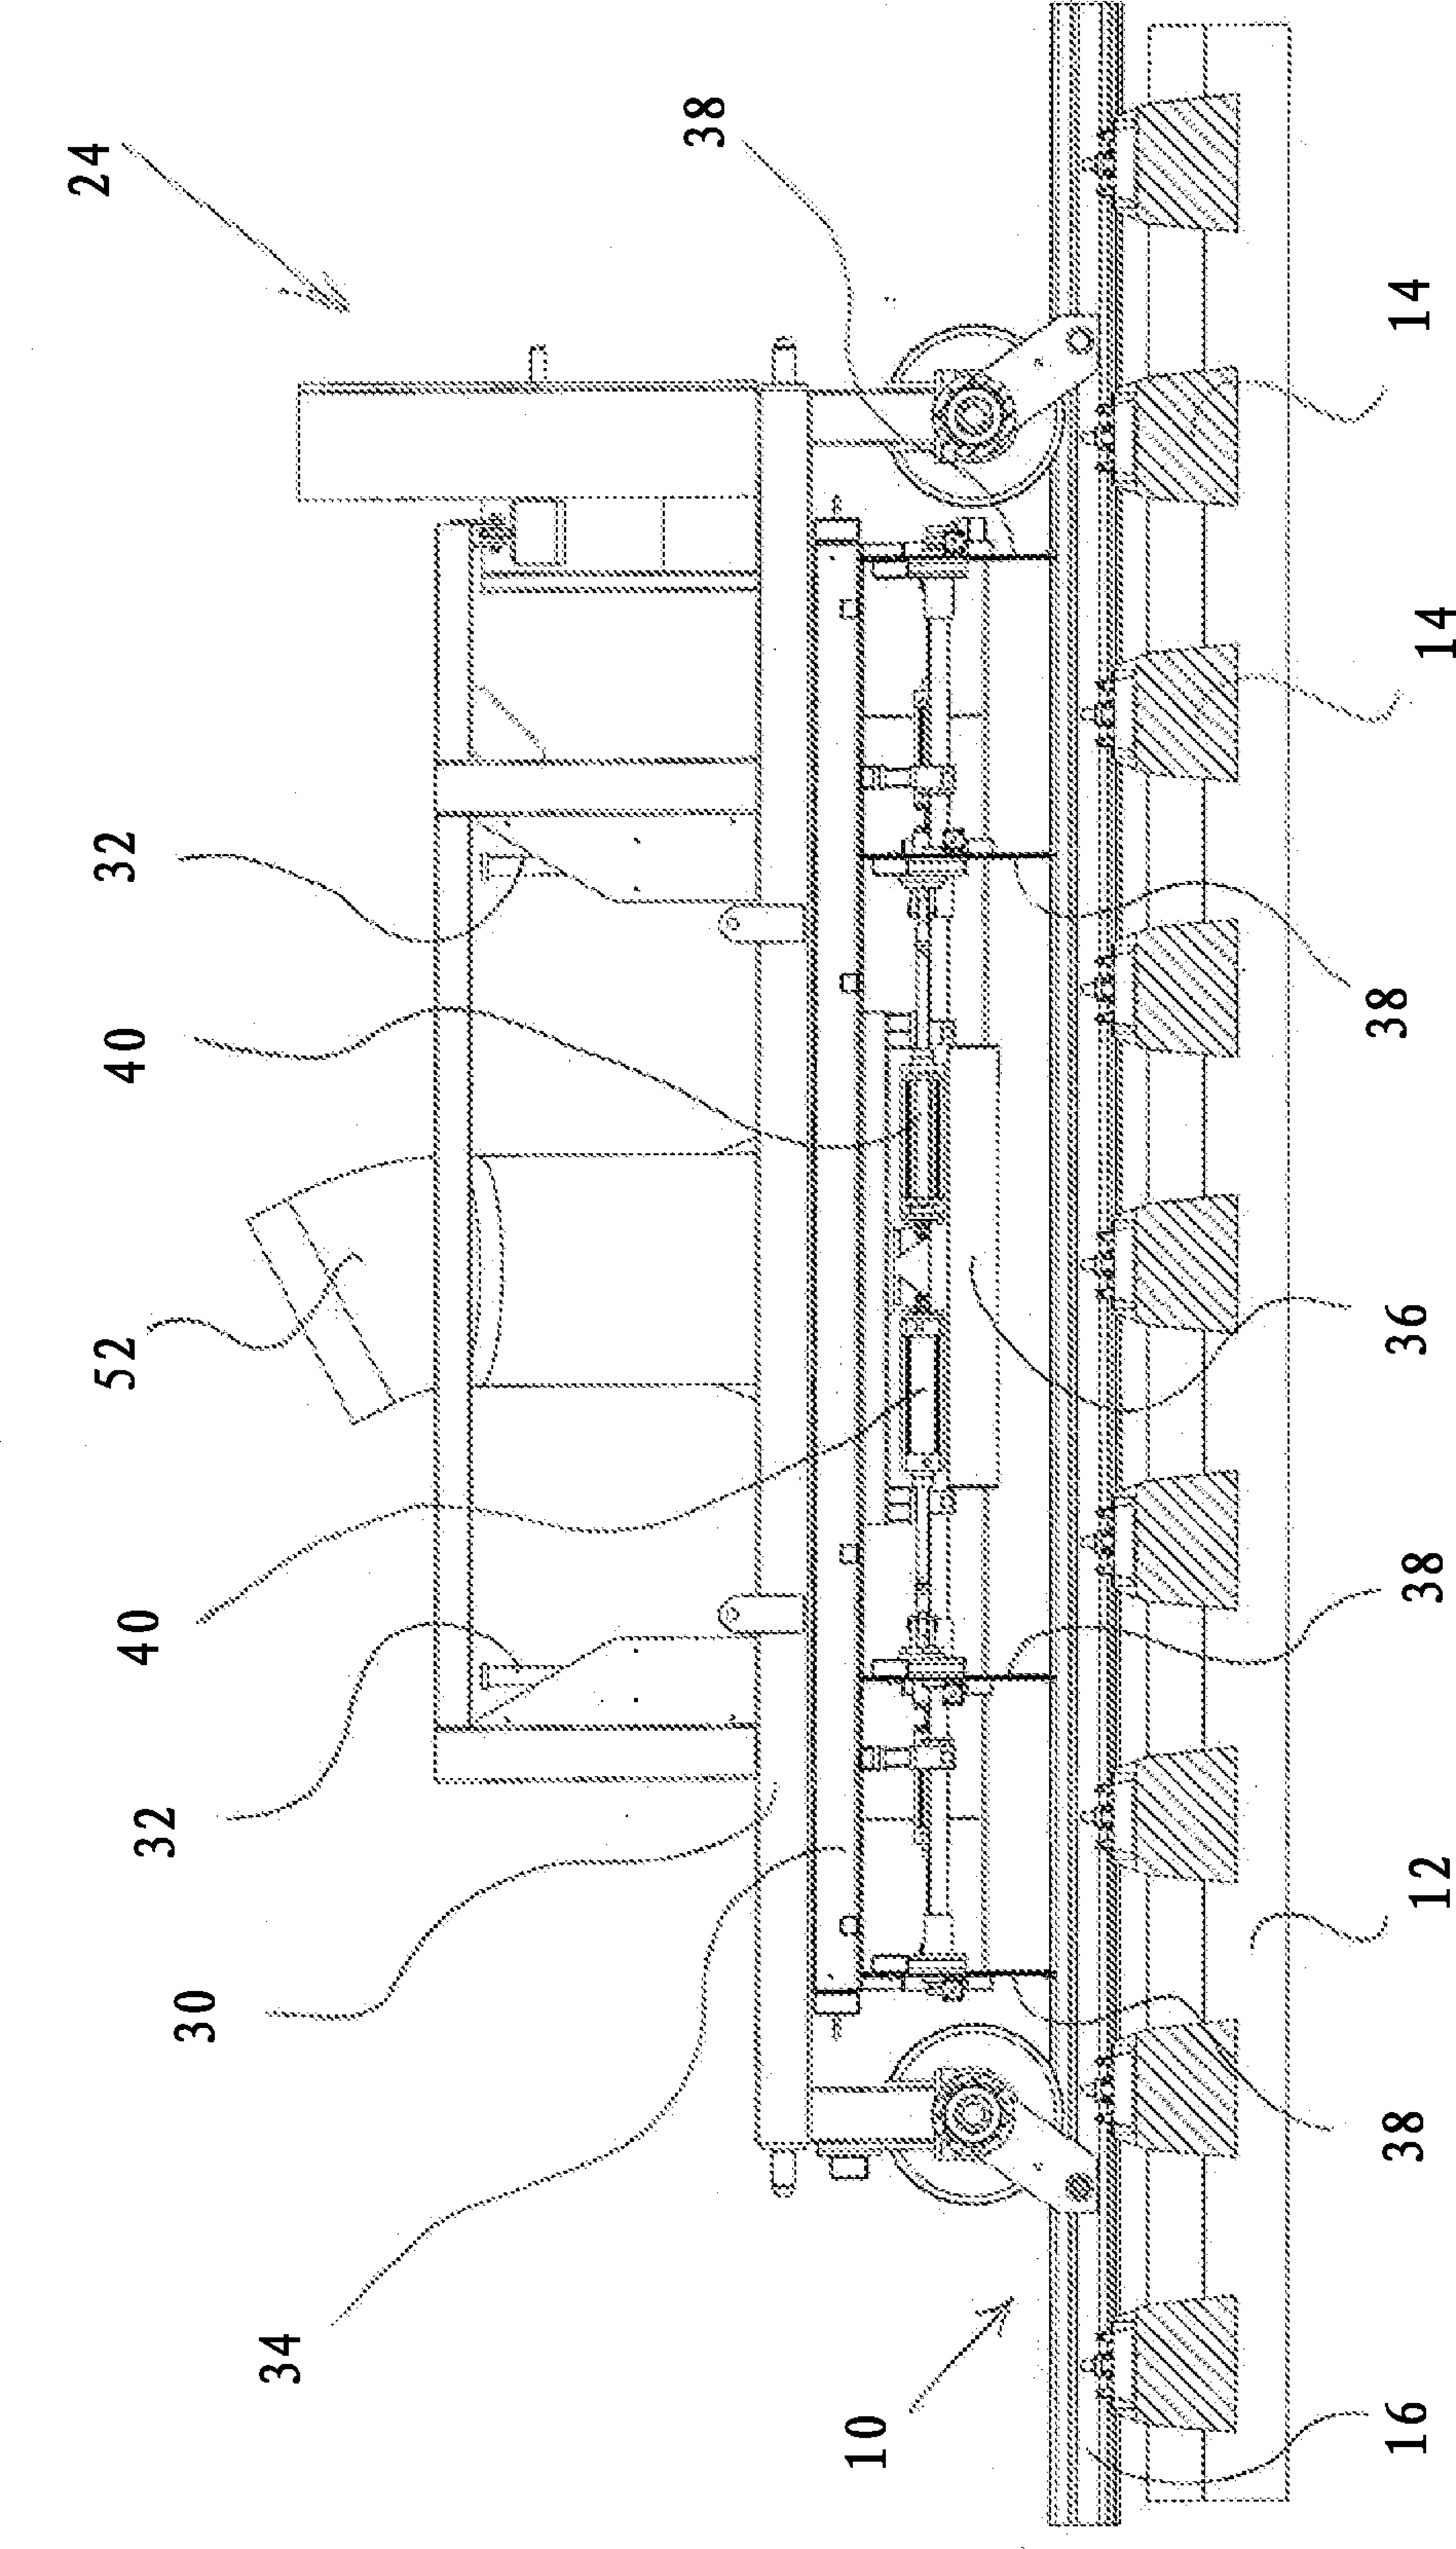 Conditioning device and method for drying and controlling the temperature of a ballast bed